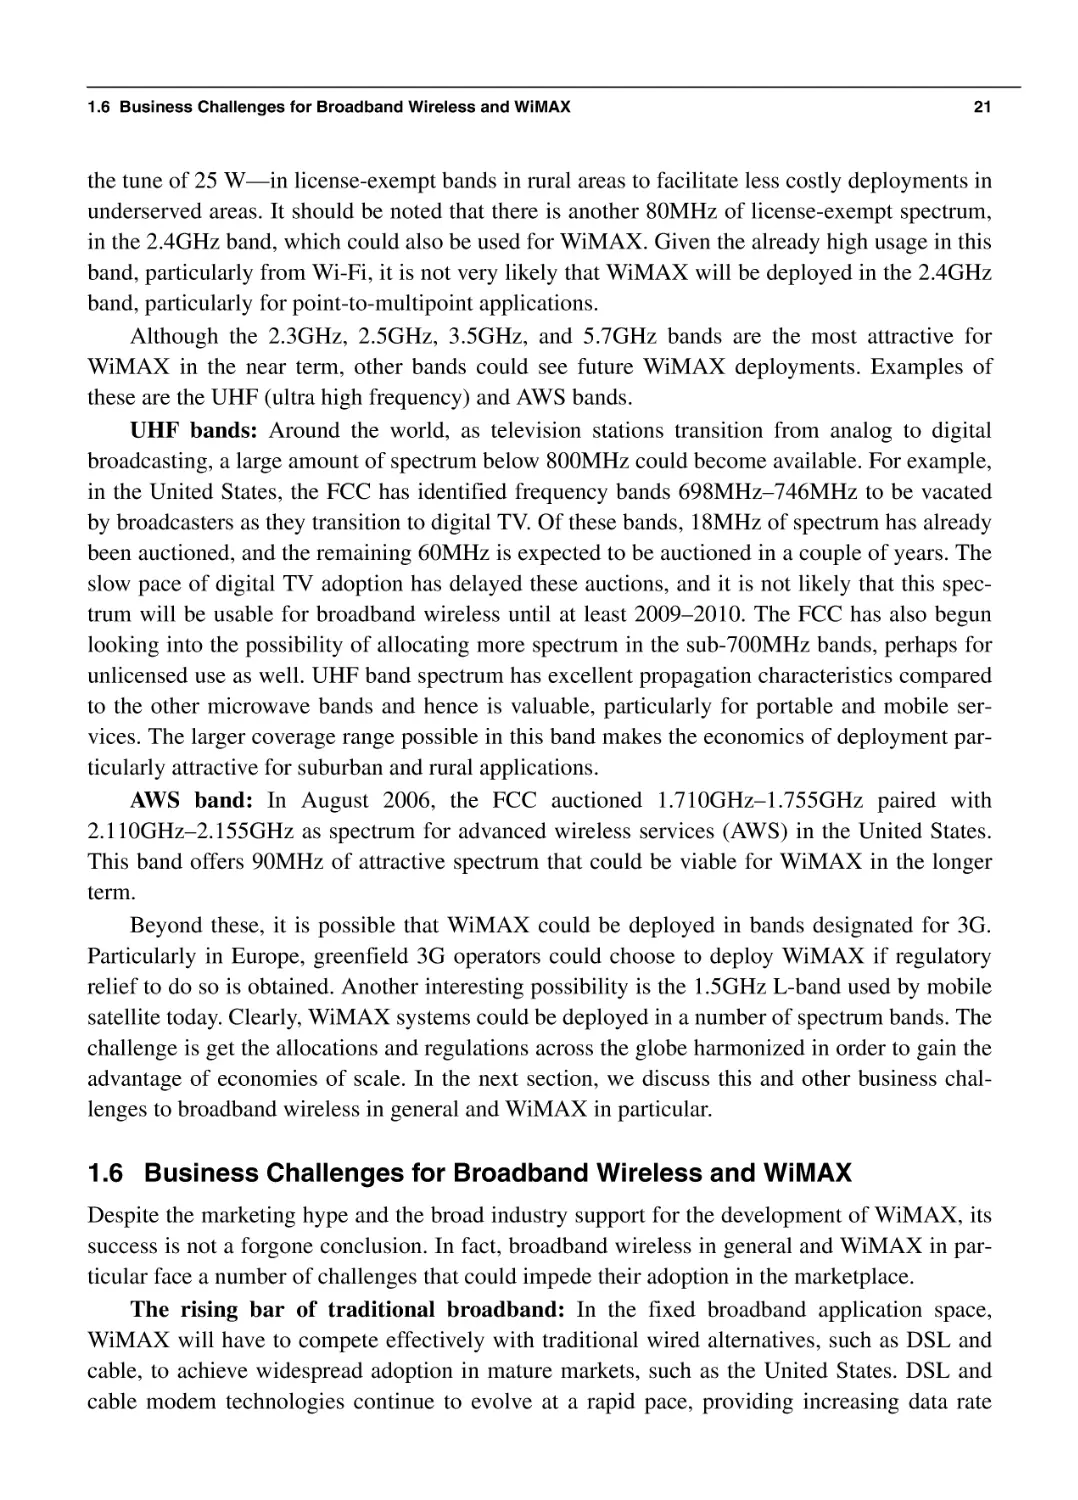 1.6 Business Challenges for Broadband Wireless and WiMAX